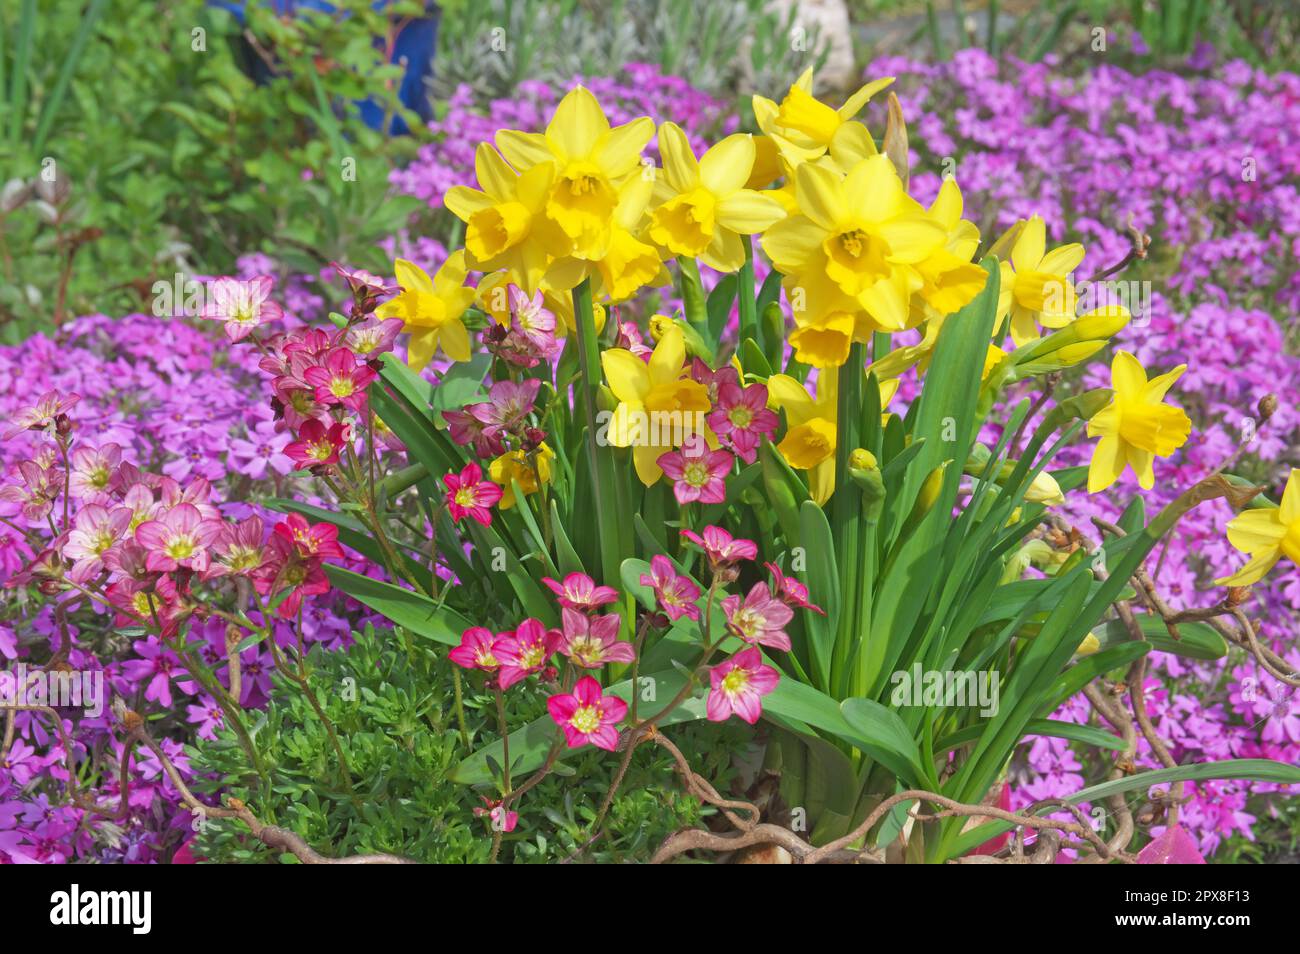 Garden border and spring plants: Saxifraga arendsii, red cap, daffodil hybrids, cushion phlox. Stock Photo